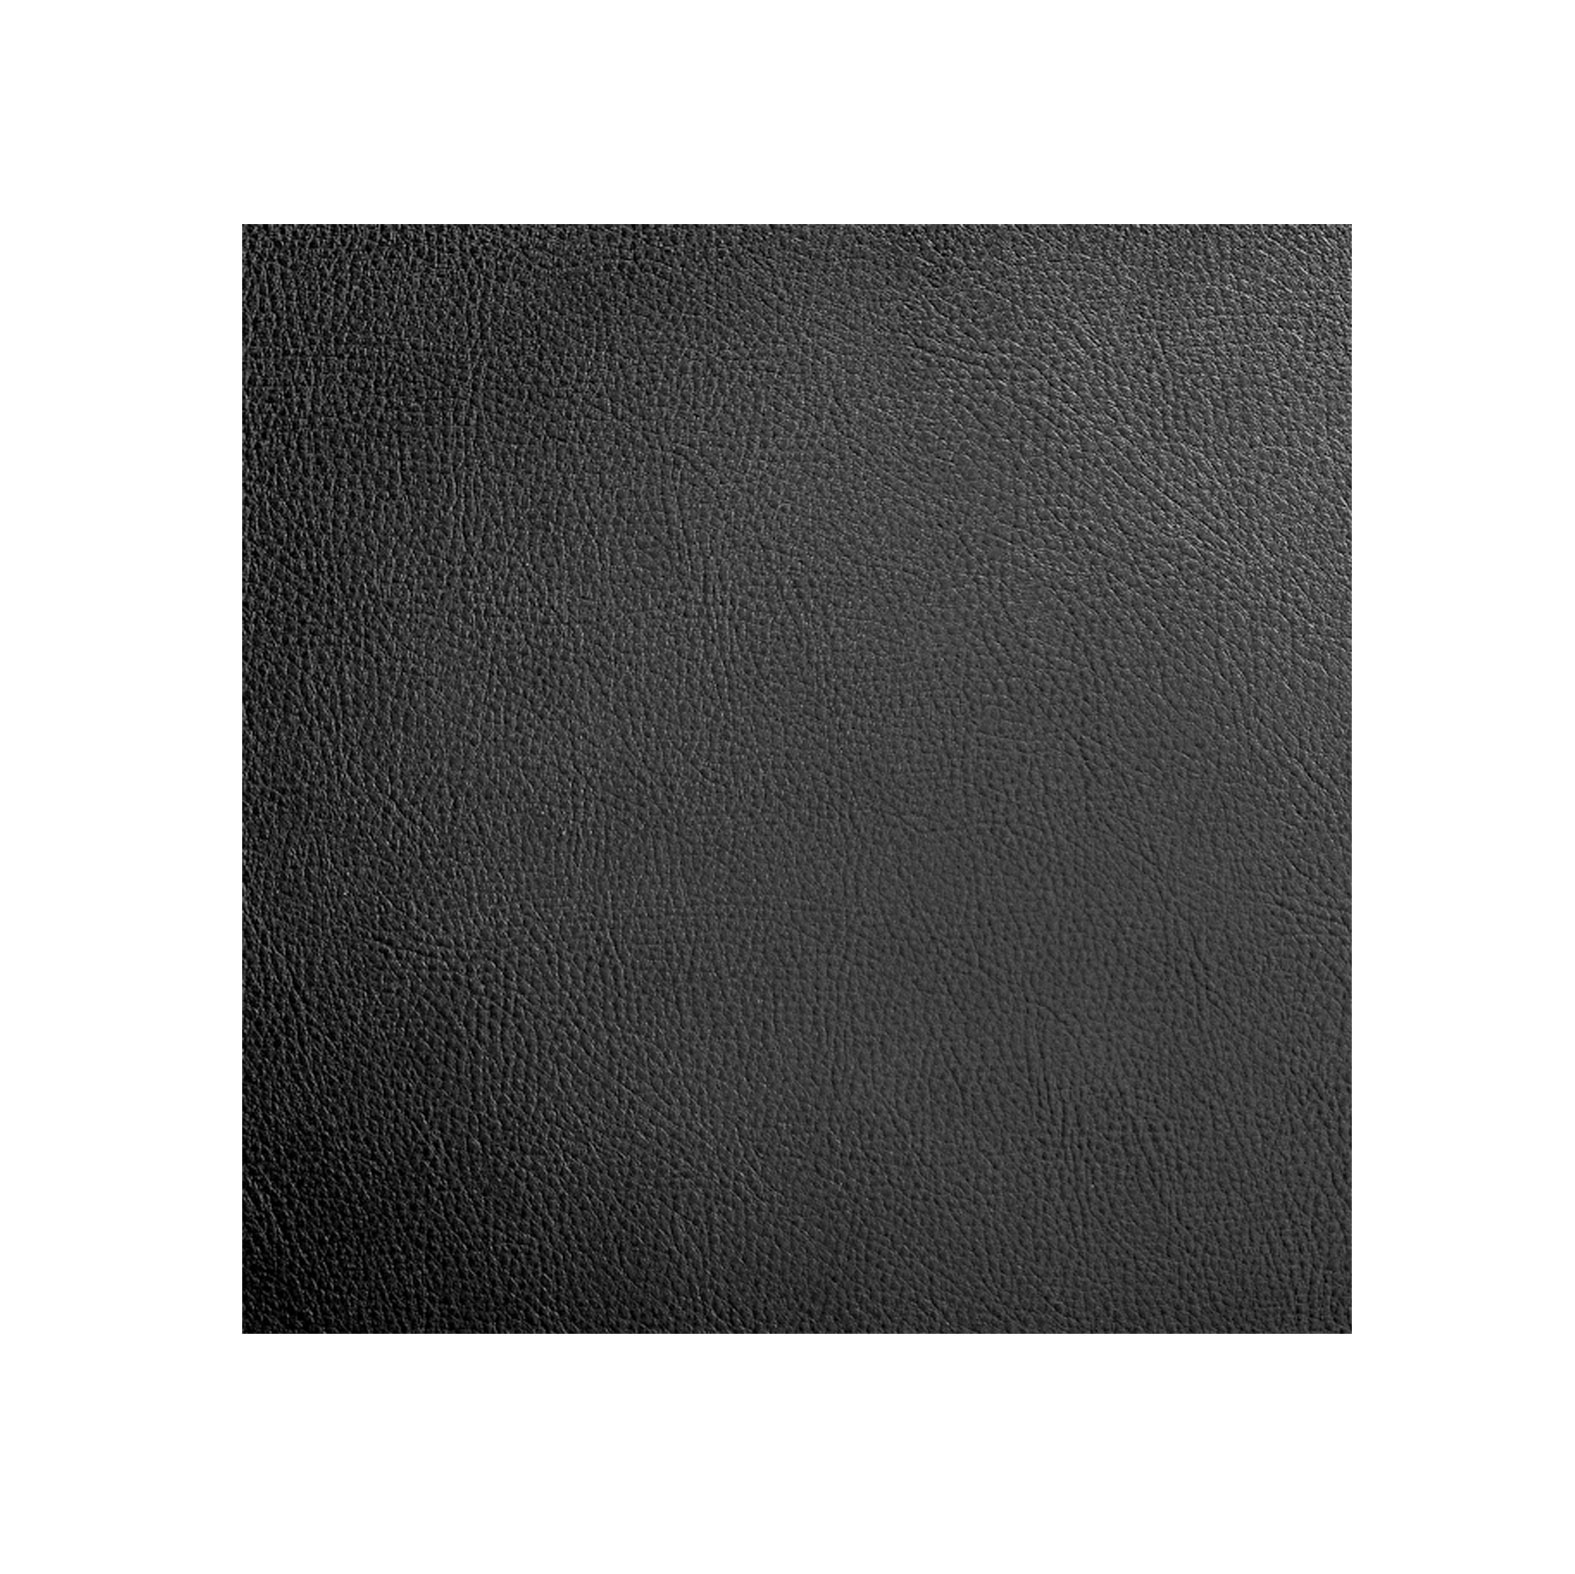 leather color pvc flooring 